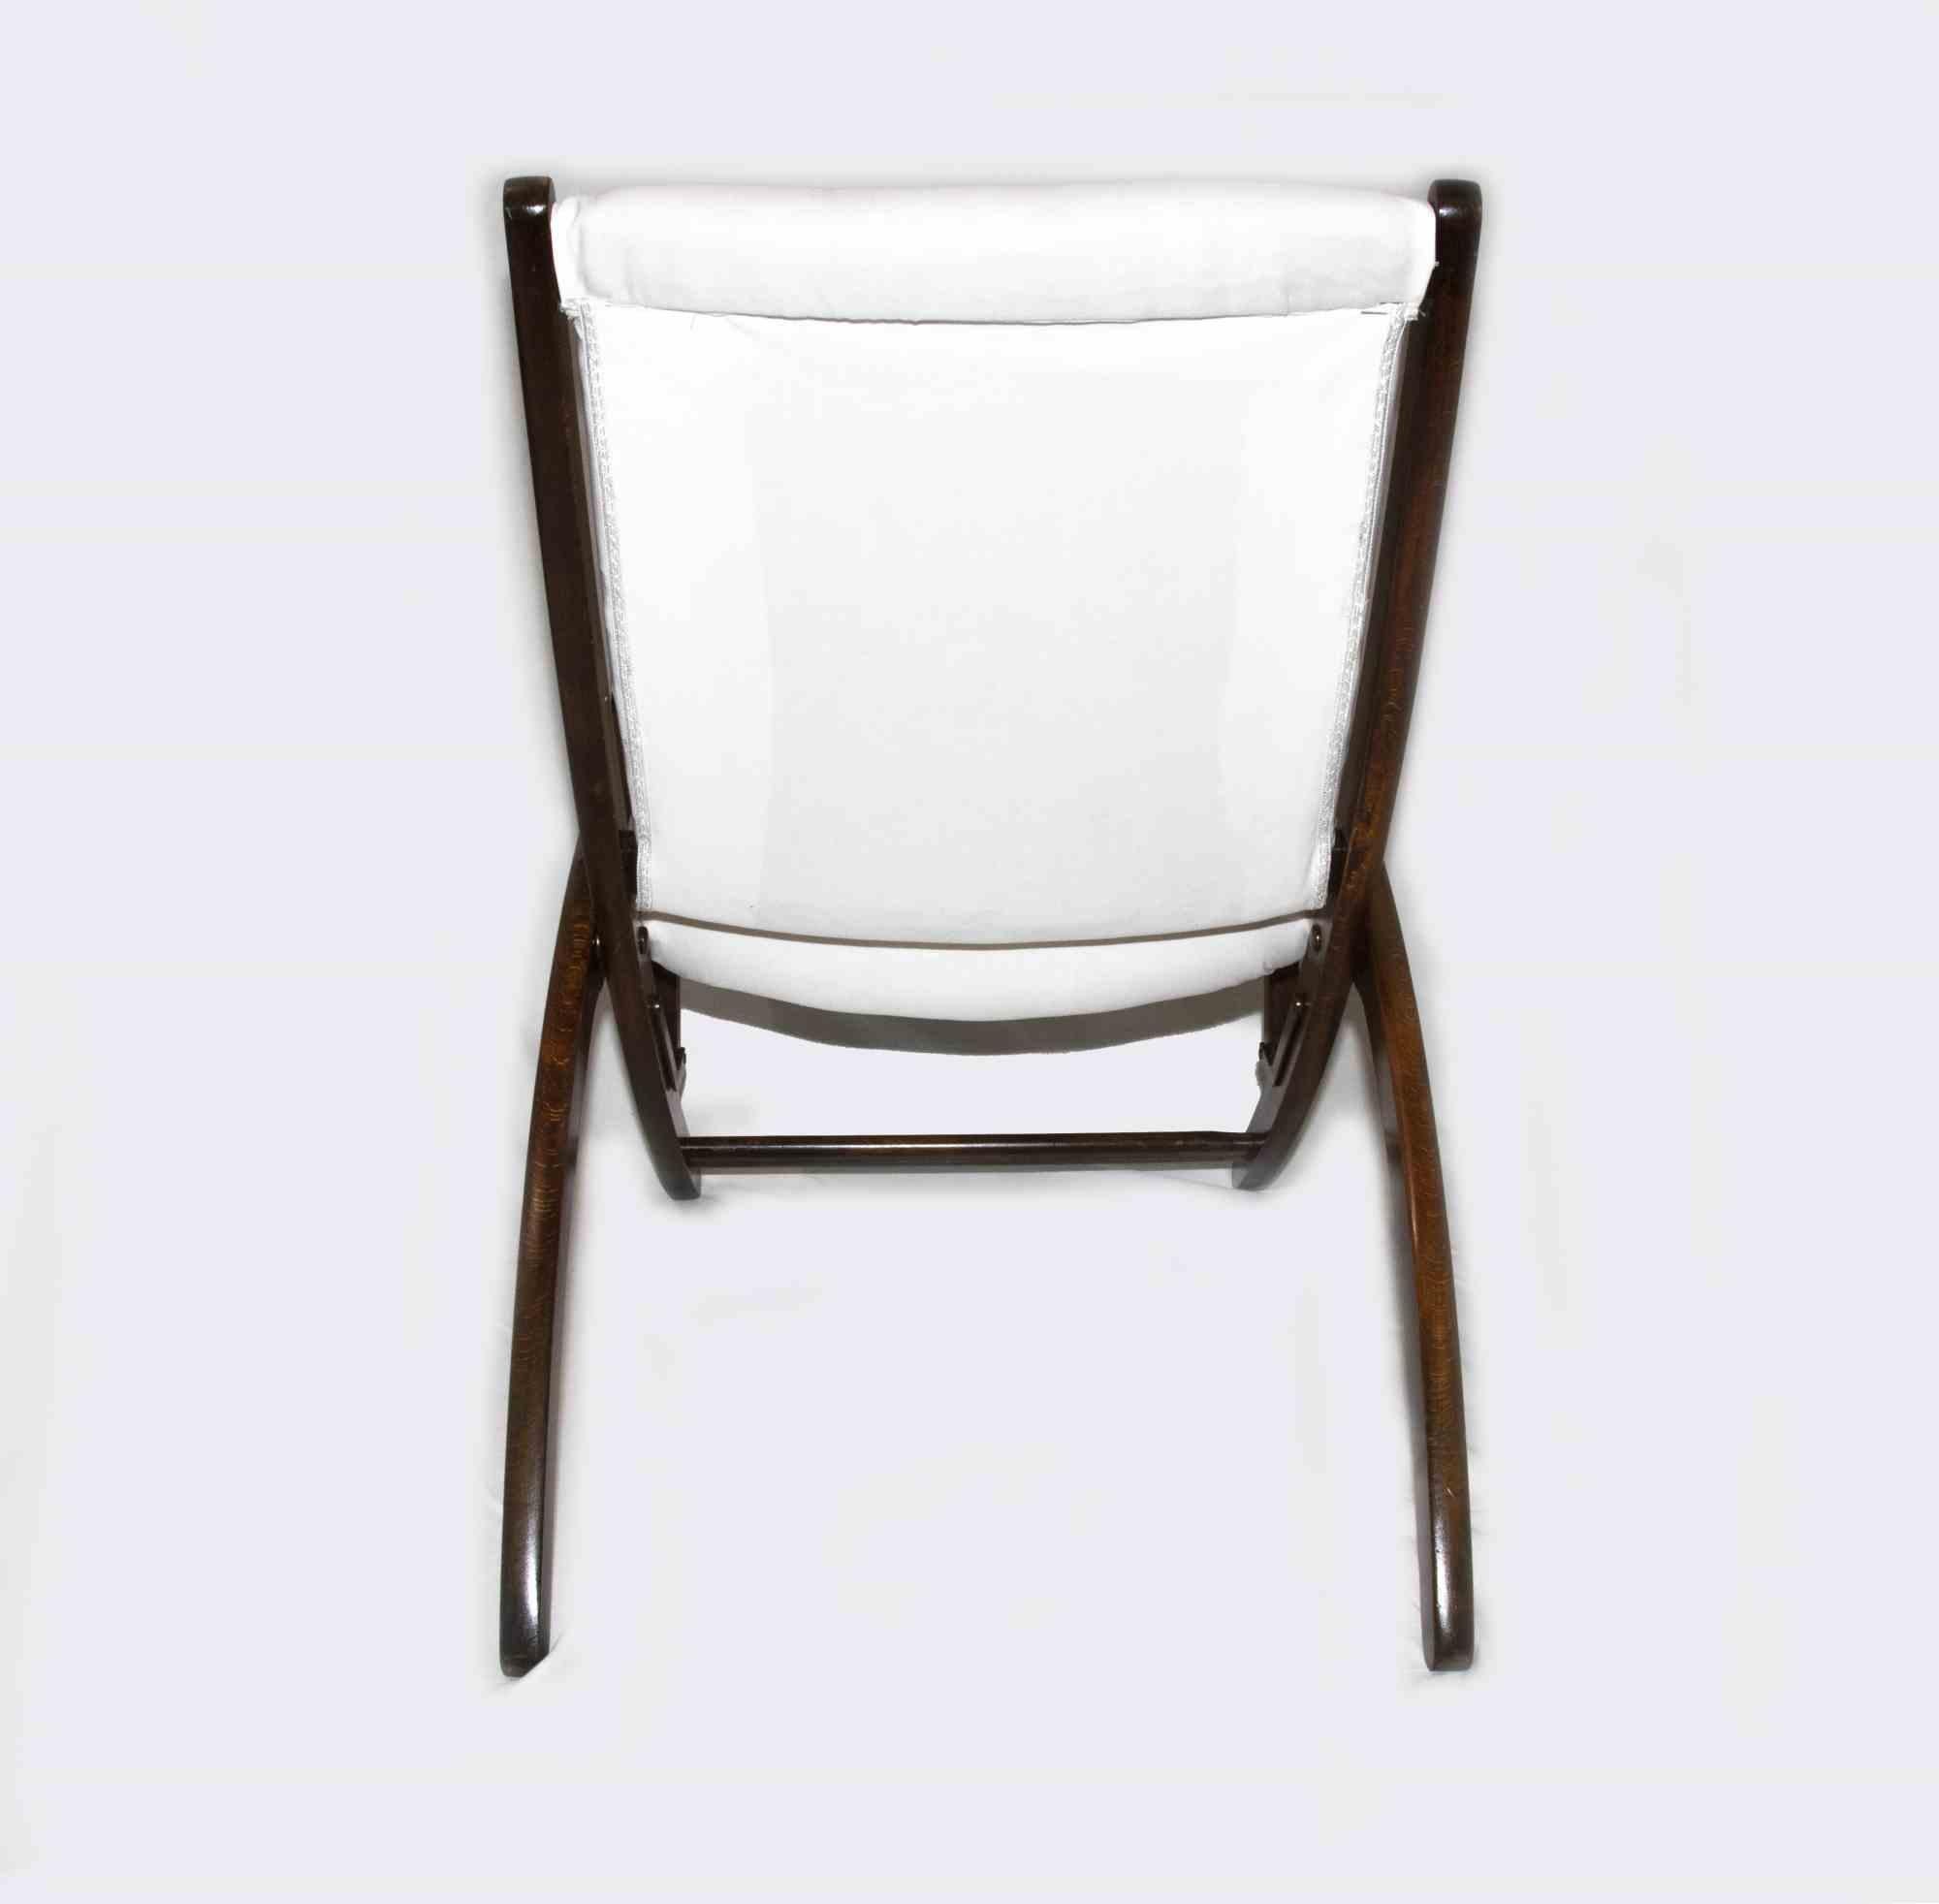 Mid-20th Century Vintage Folding Chair Ninfea by Gio Ponti for Reguitti, Italy, 1958 For Sale